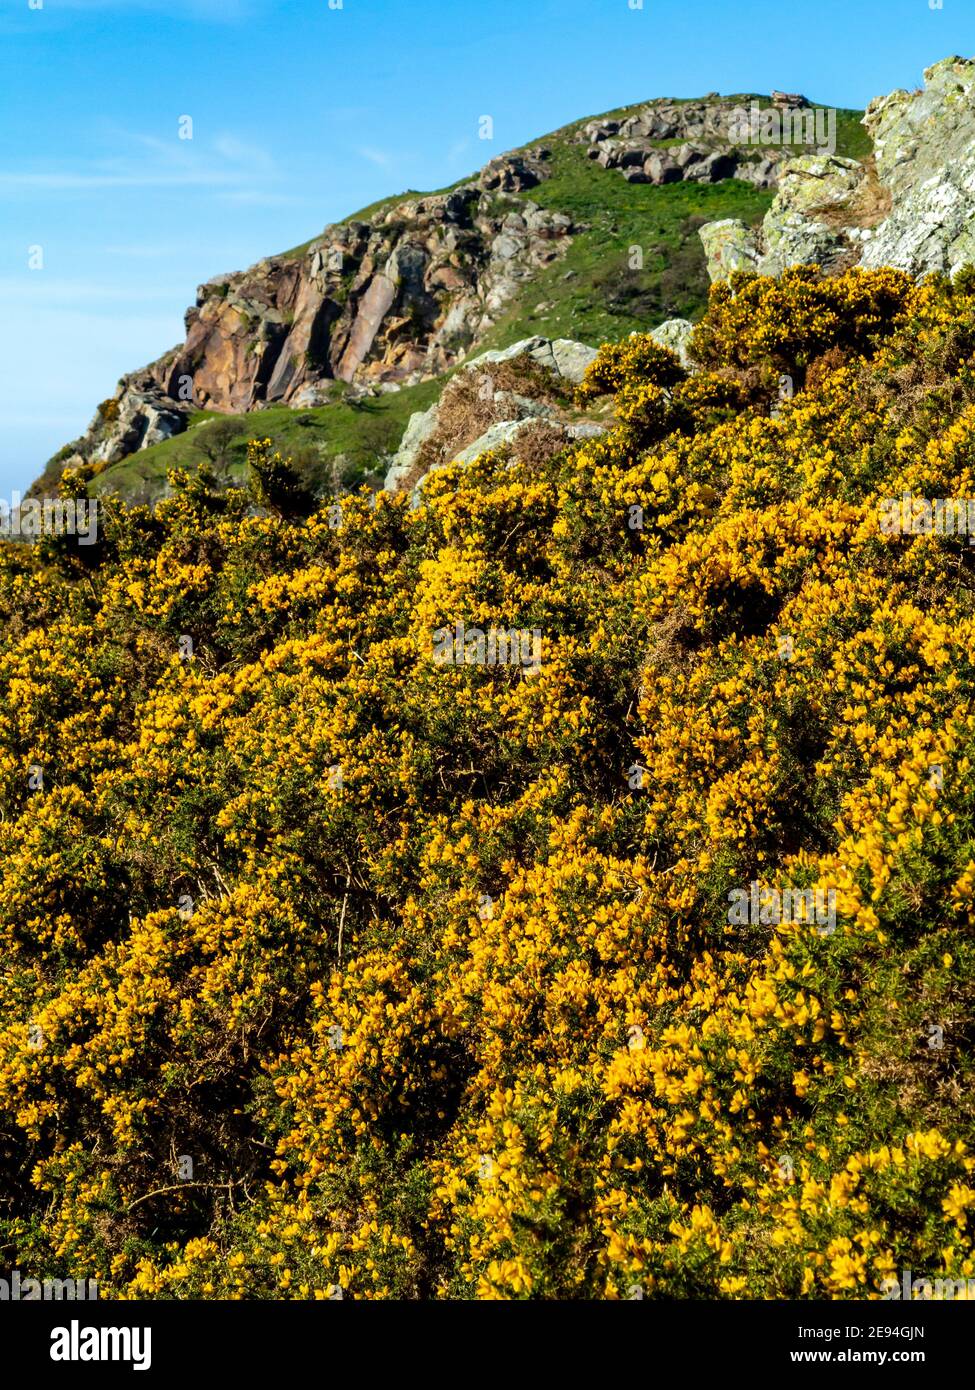 Gorse Fabaceae a thorny evergreen shrub growing in spring on a hillside above Deganwy in Conwy North Wales UK Stock Photo